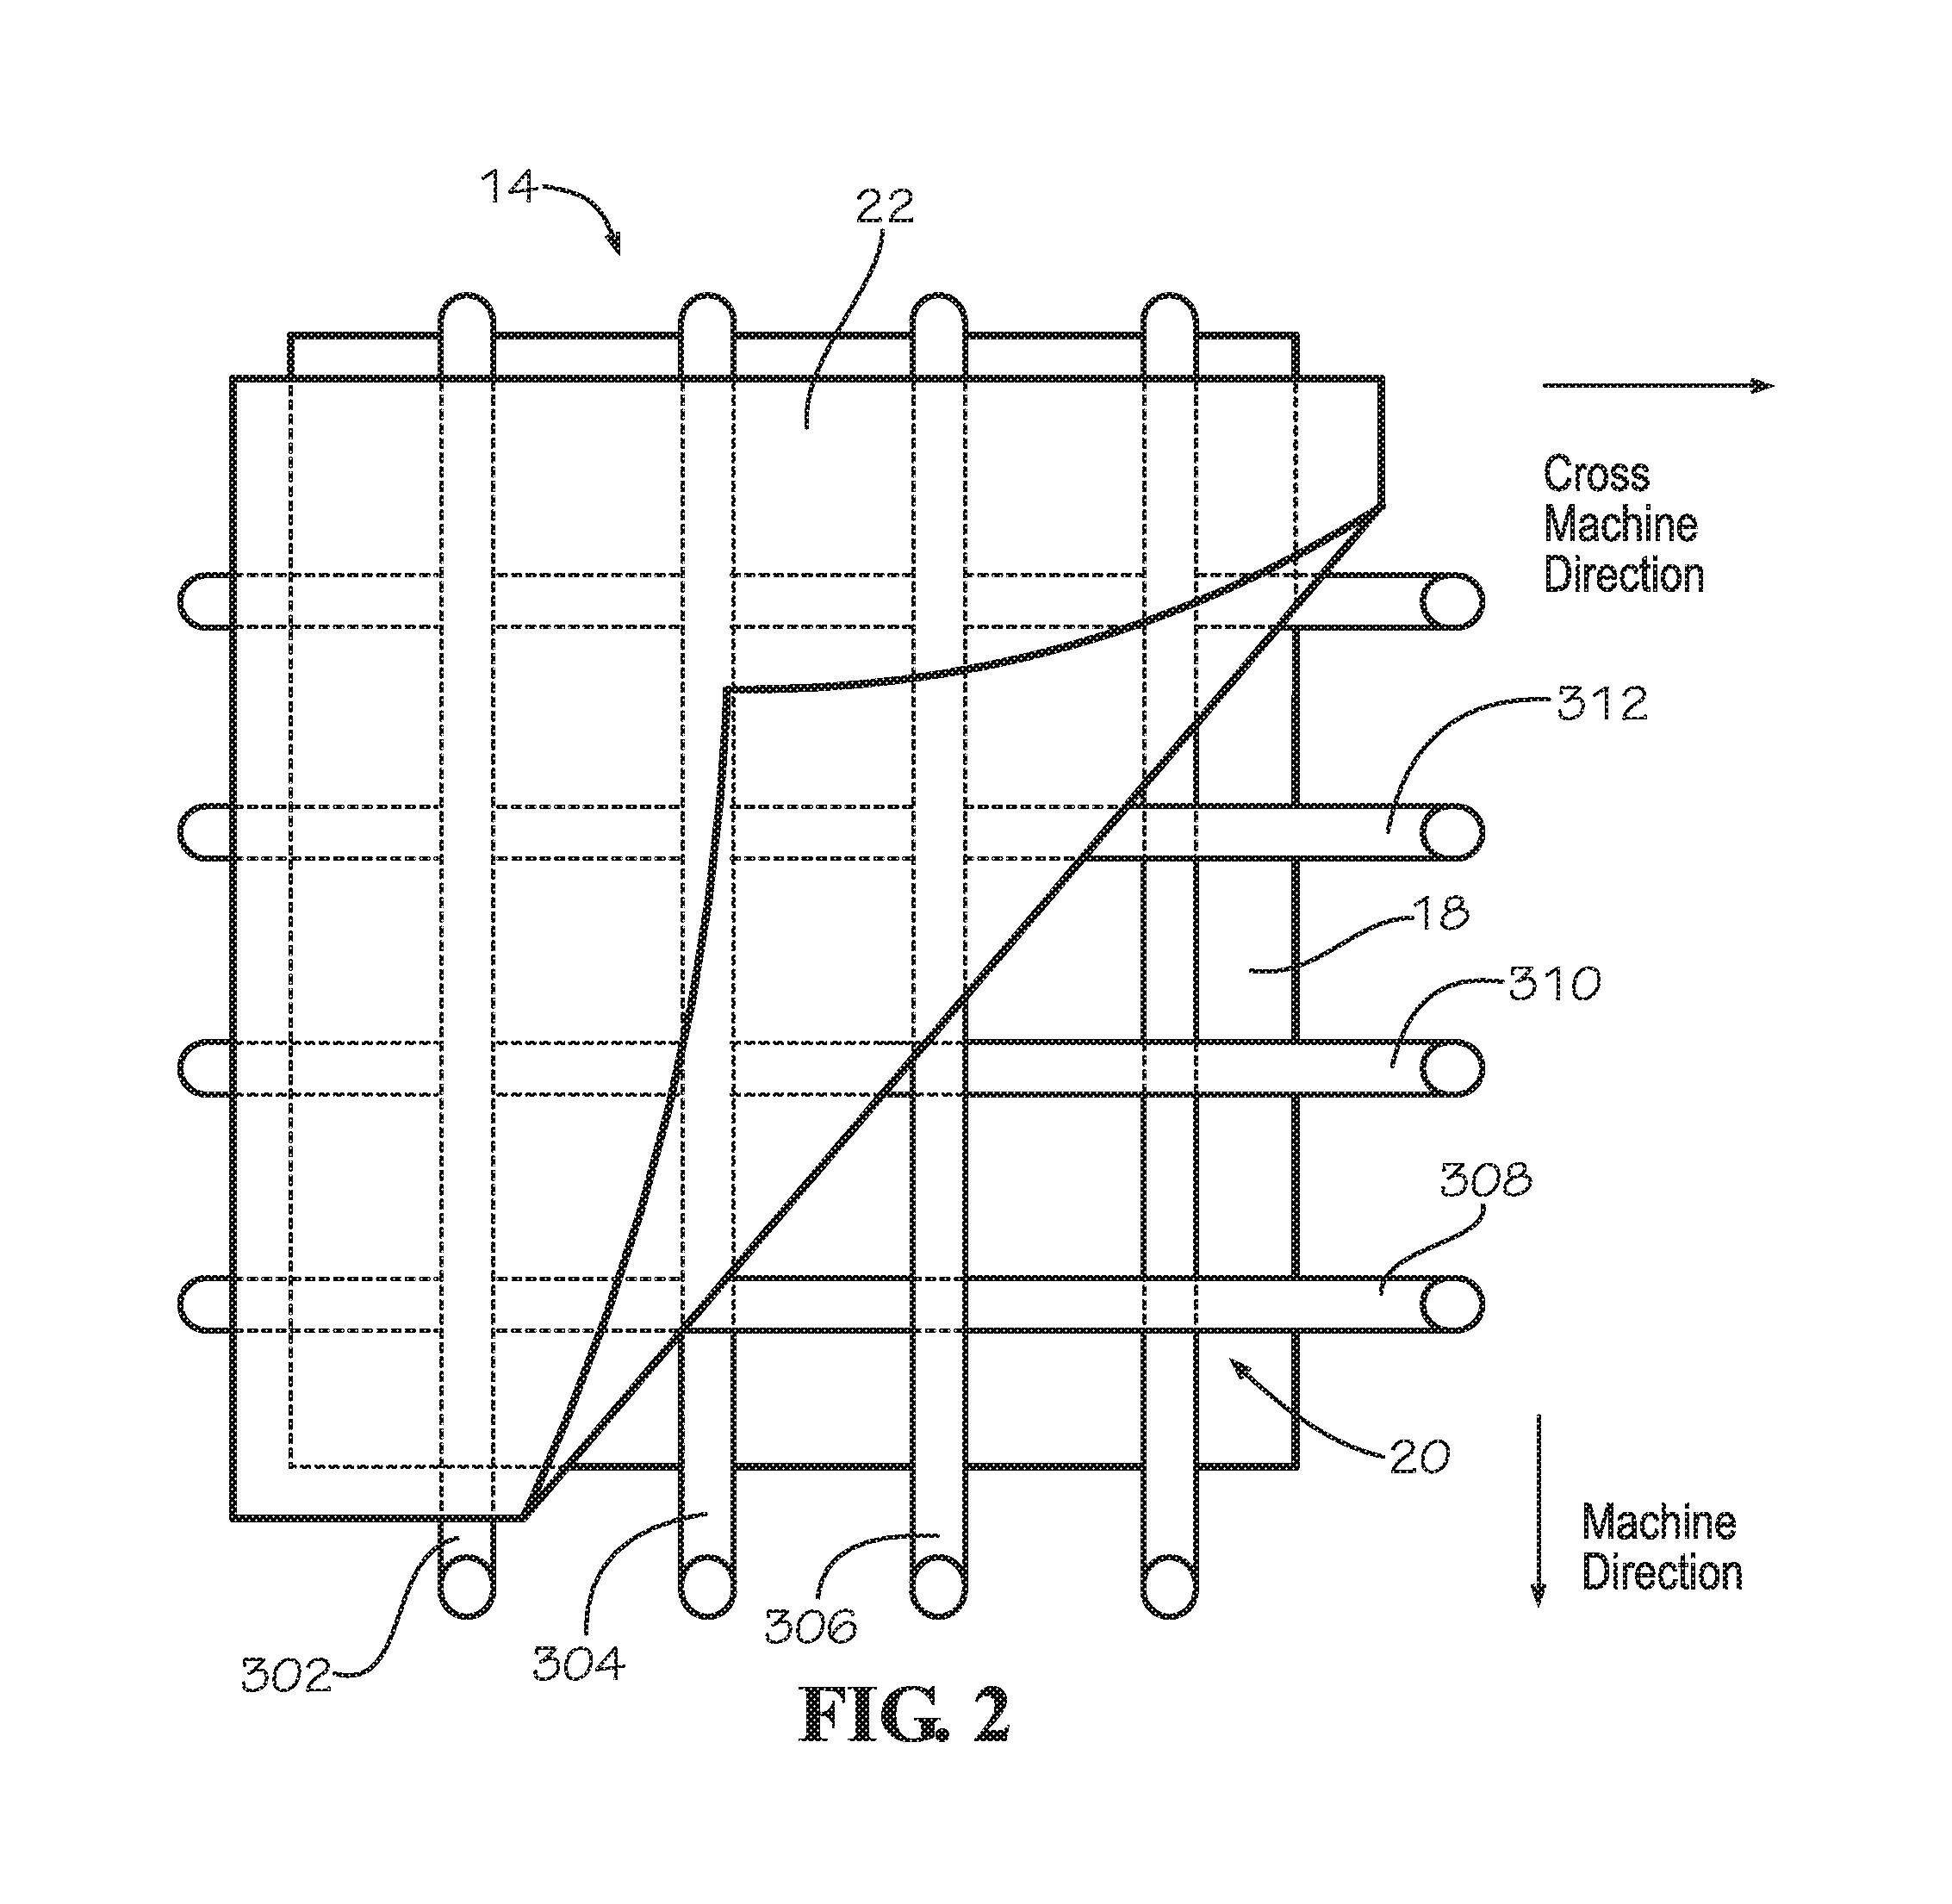 Foam sheathing reinforced with hybrid laminated fabric impregnated with vapor permeable air barrier material and method of making and using same